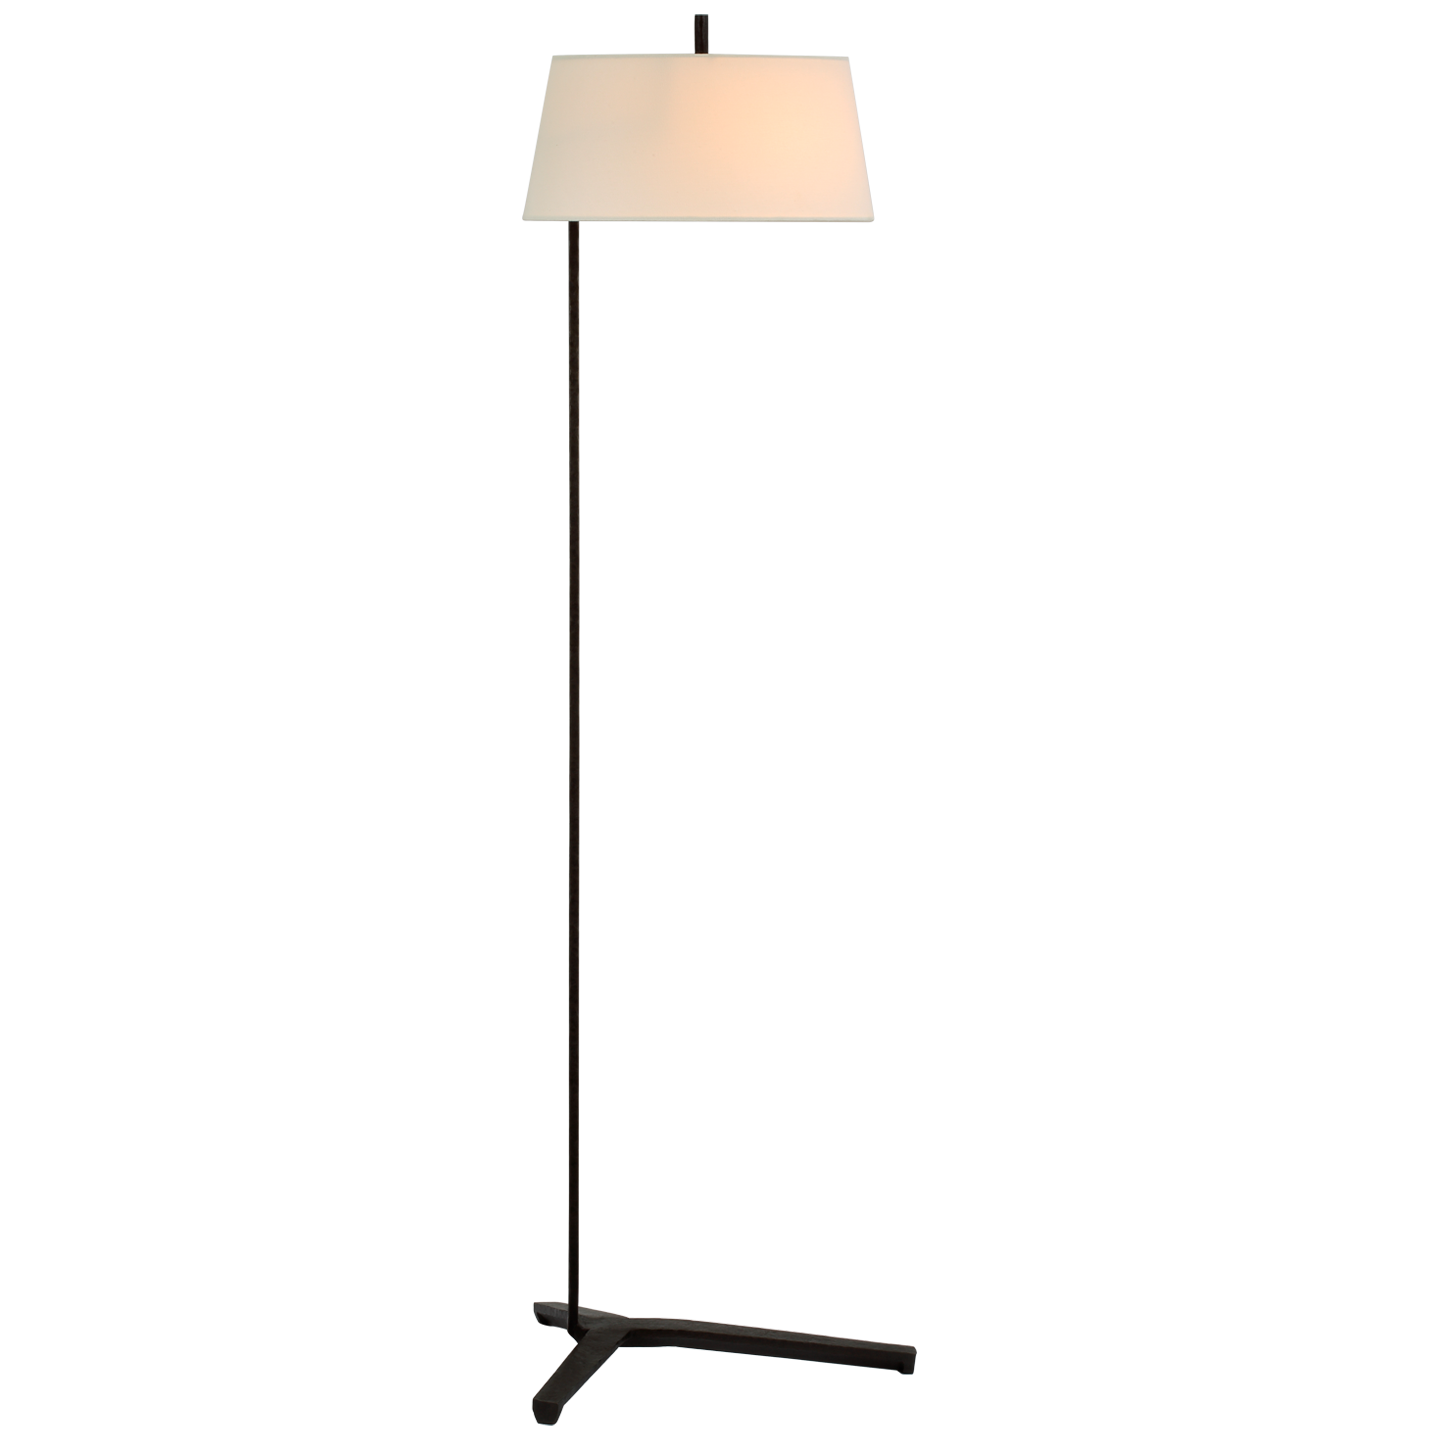 Francesco Floor Lamp in Aged Iron with Linen Shade